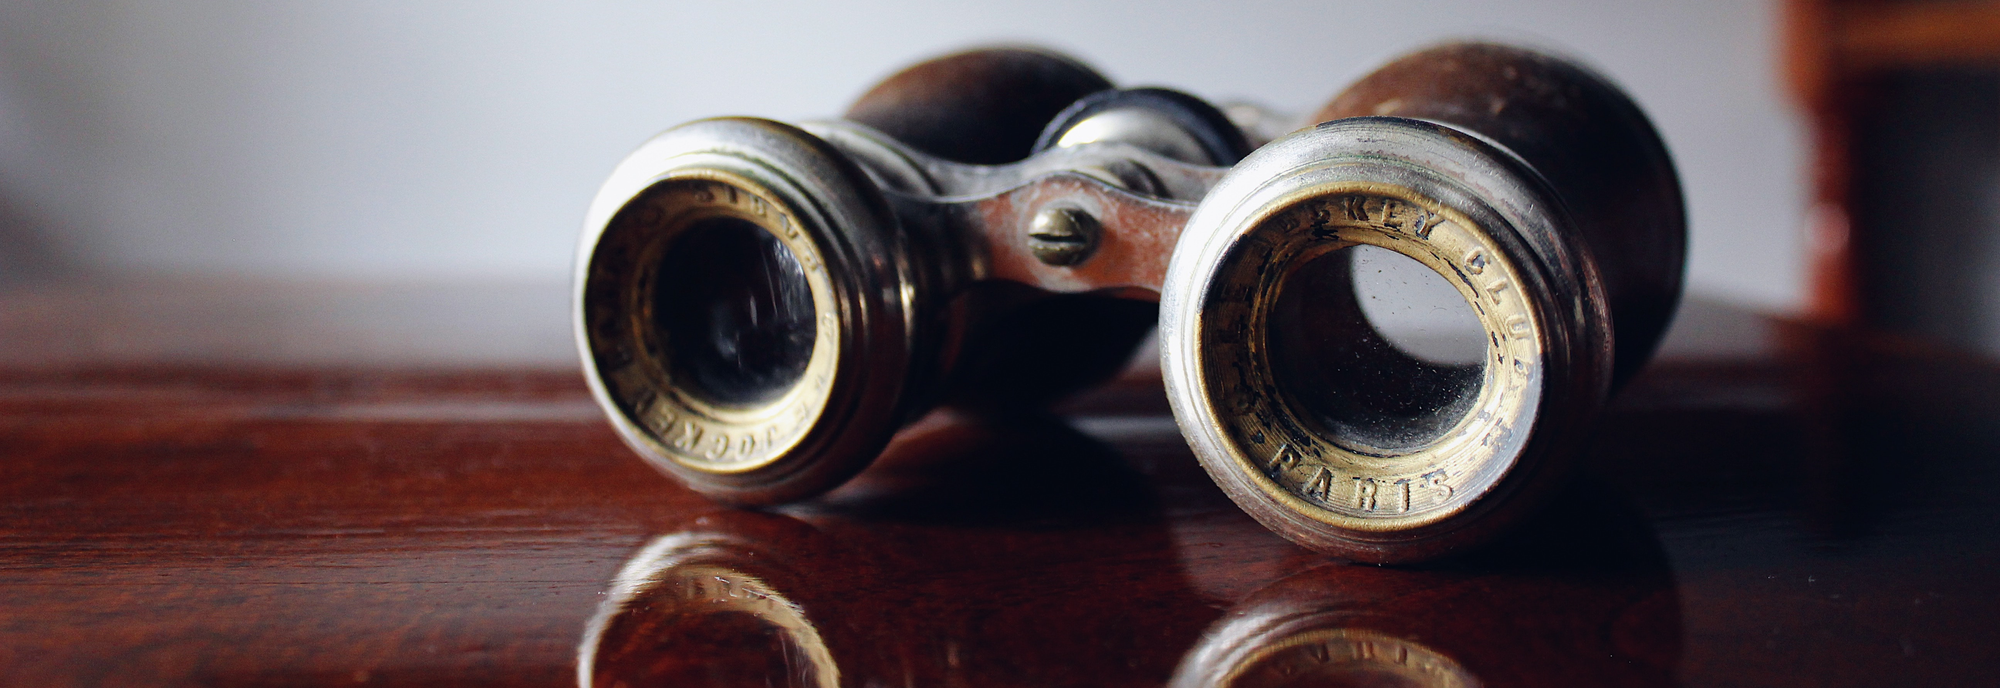 A pair of binoculars is shown to signify finding threats and opportunities in the market